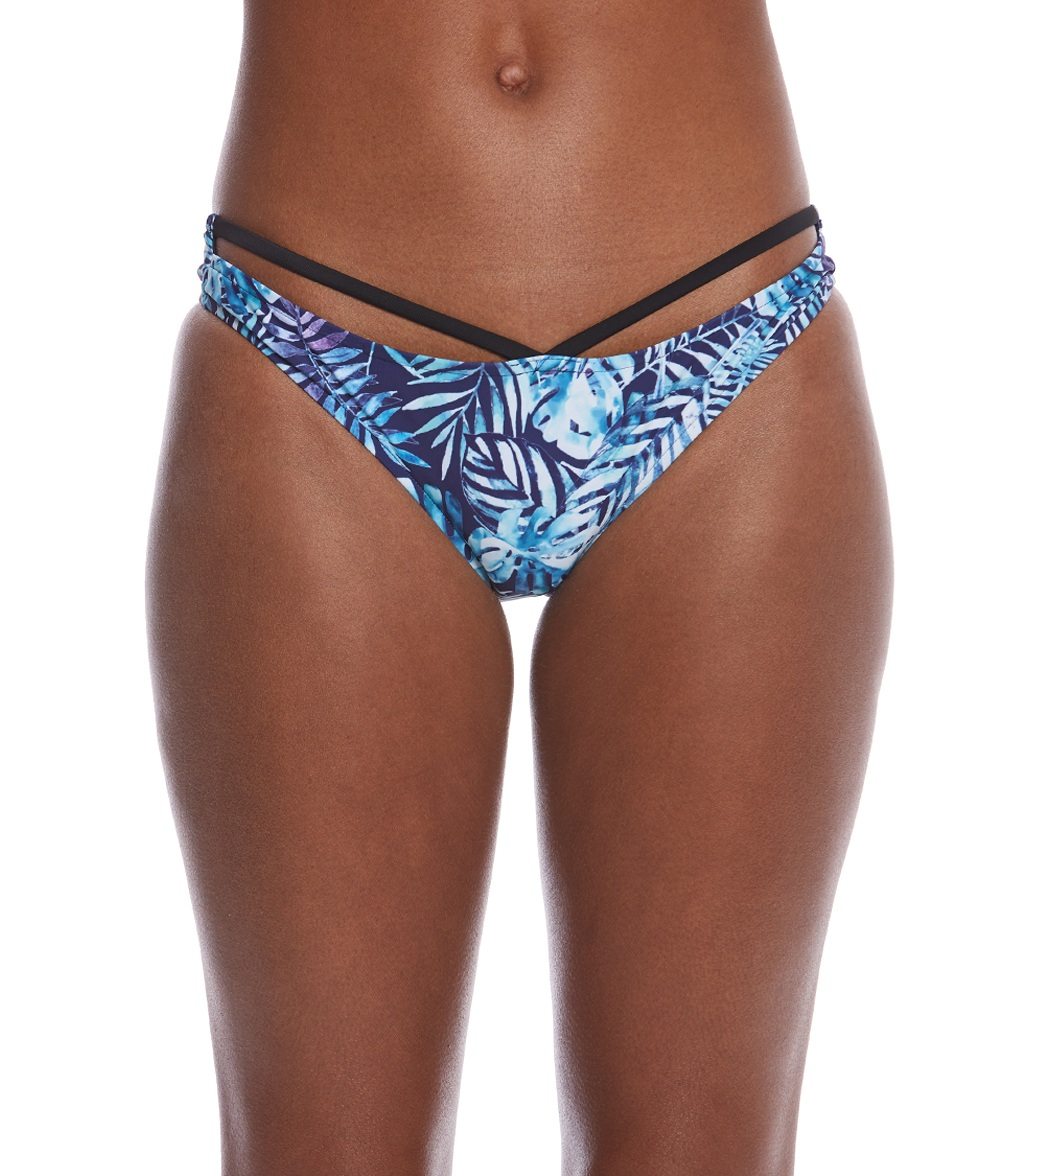 Rip Curl Tropic Oasis Luxe Hipster Bikini Bottom - Navy Large - Swimoutlet.com